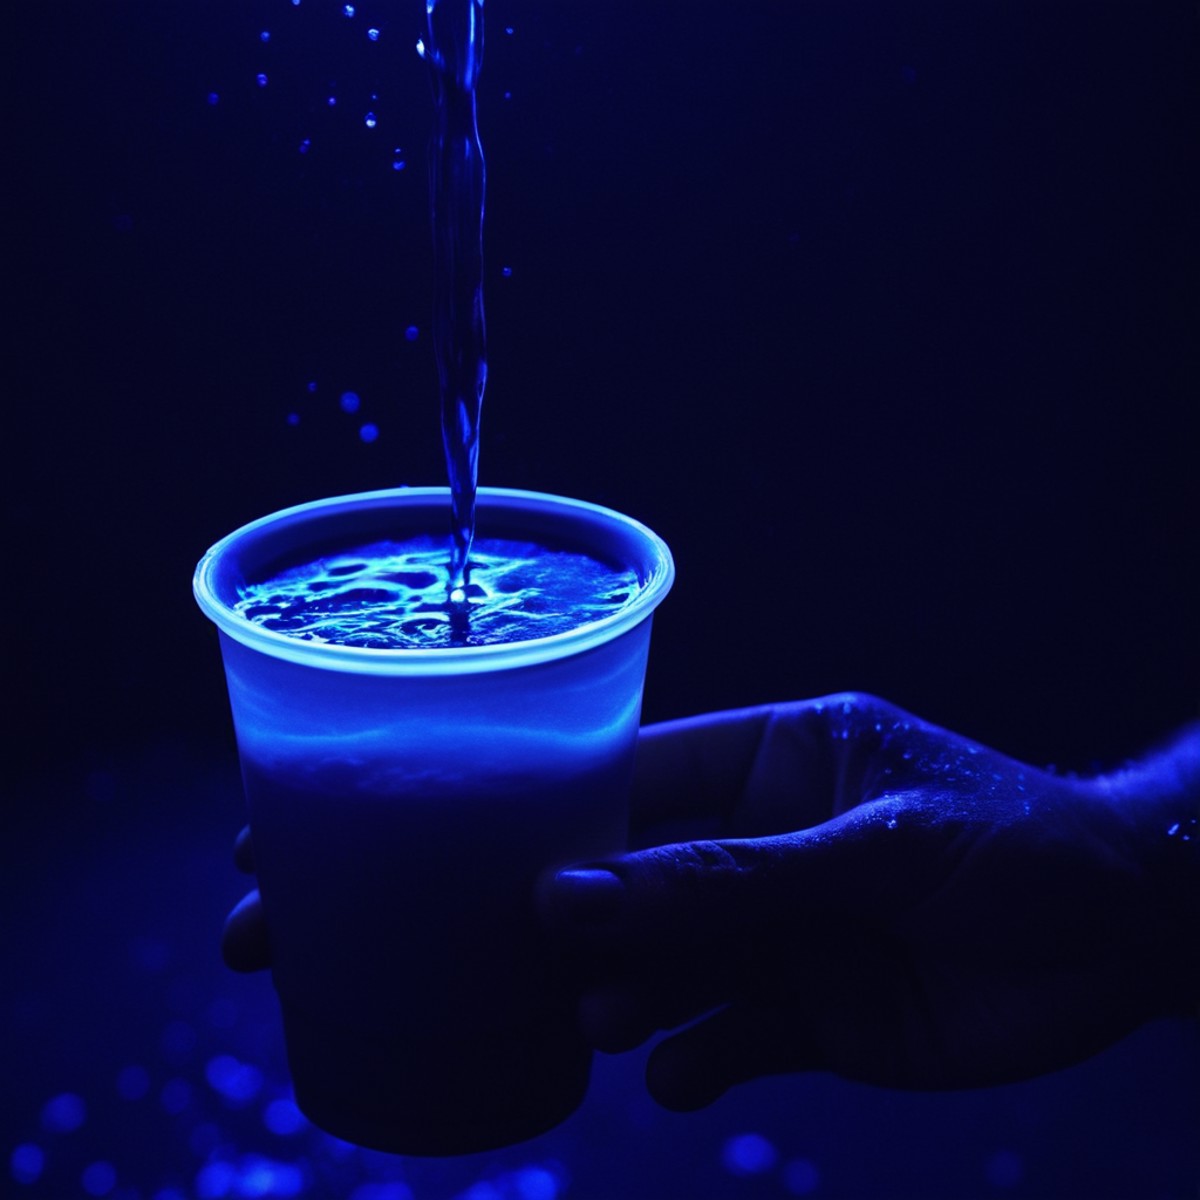 cinematic film still of  <lora:Ultraviolet lighting Style:1>
a person holding a cup of liquid in their hand Ultraviolet li...